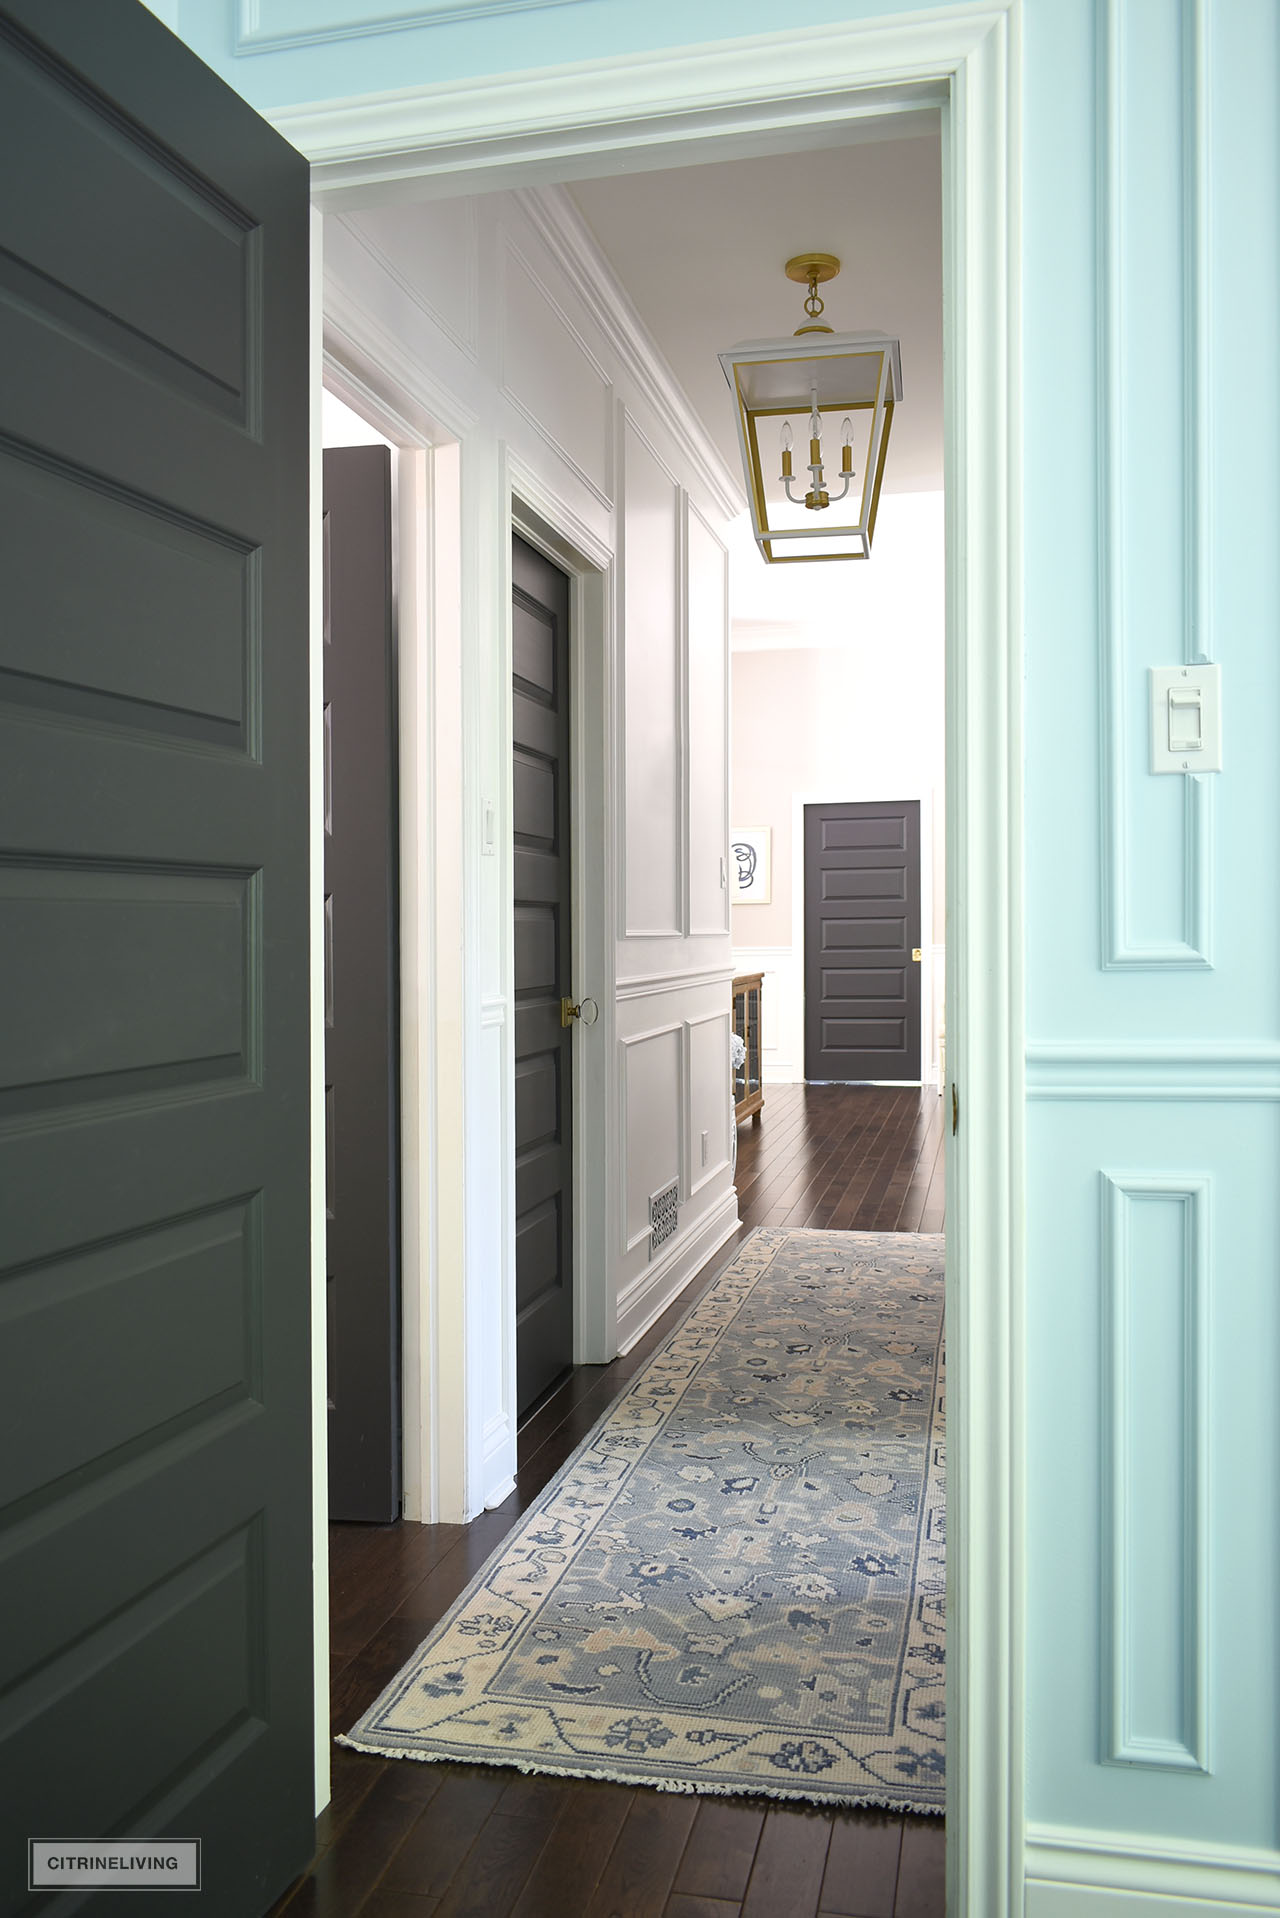 A view down a small but elegant hallway painted white, with wall moldings, crown moldings, a large oversized pendant light and light blue oushak runner.